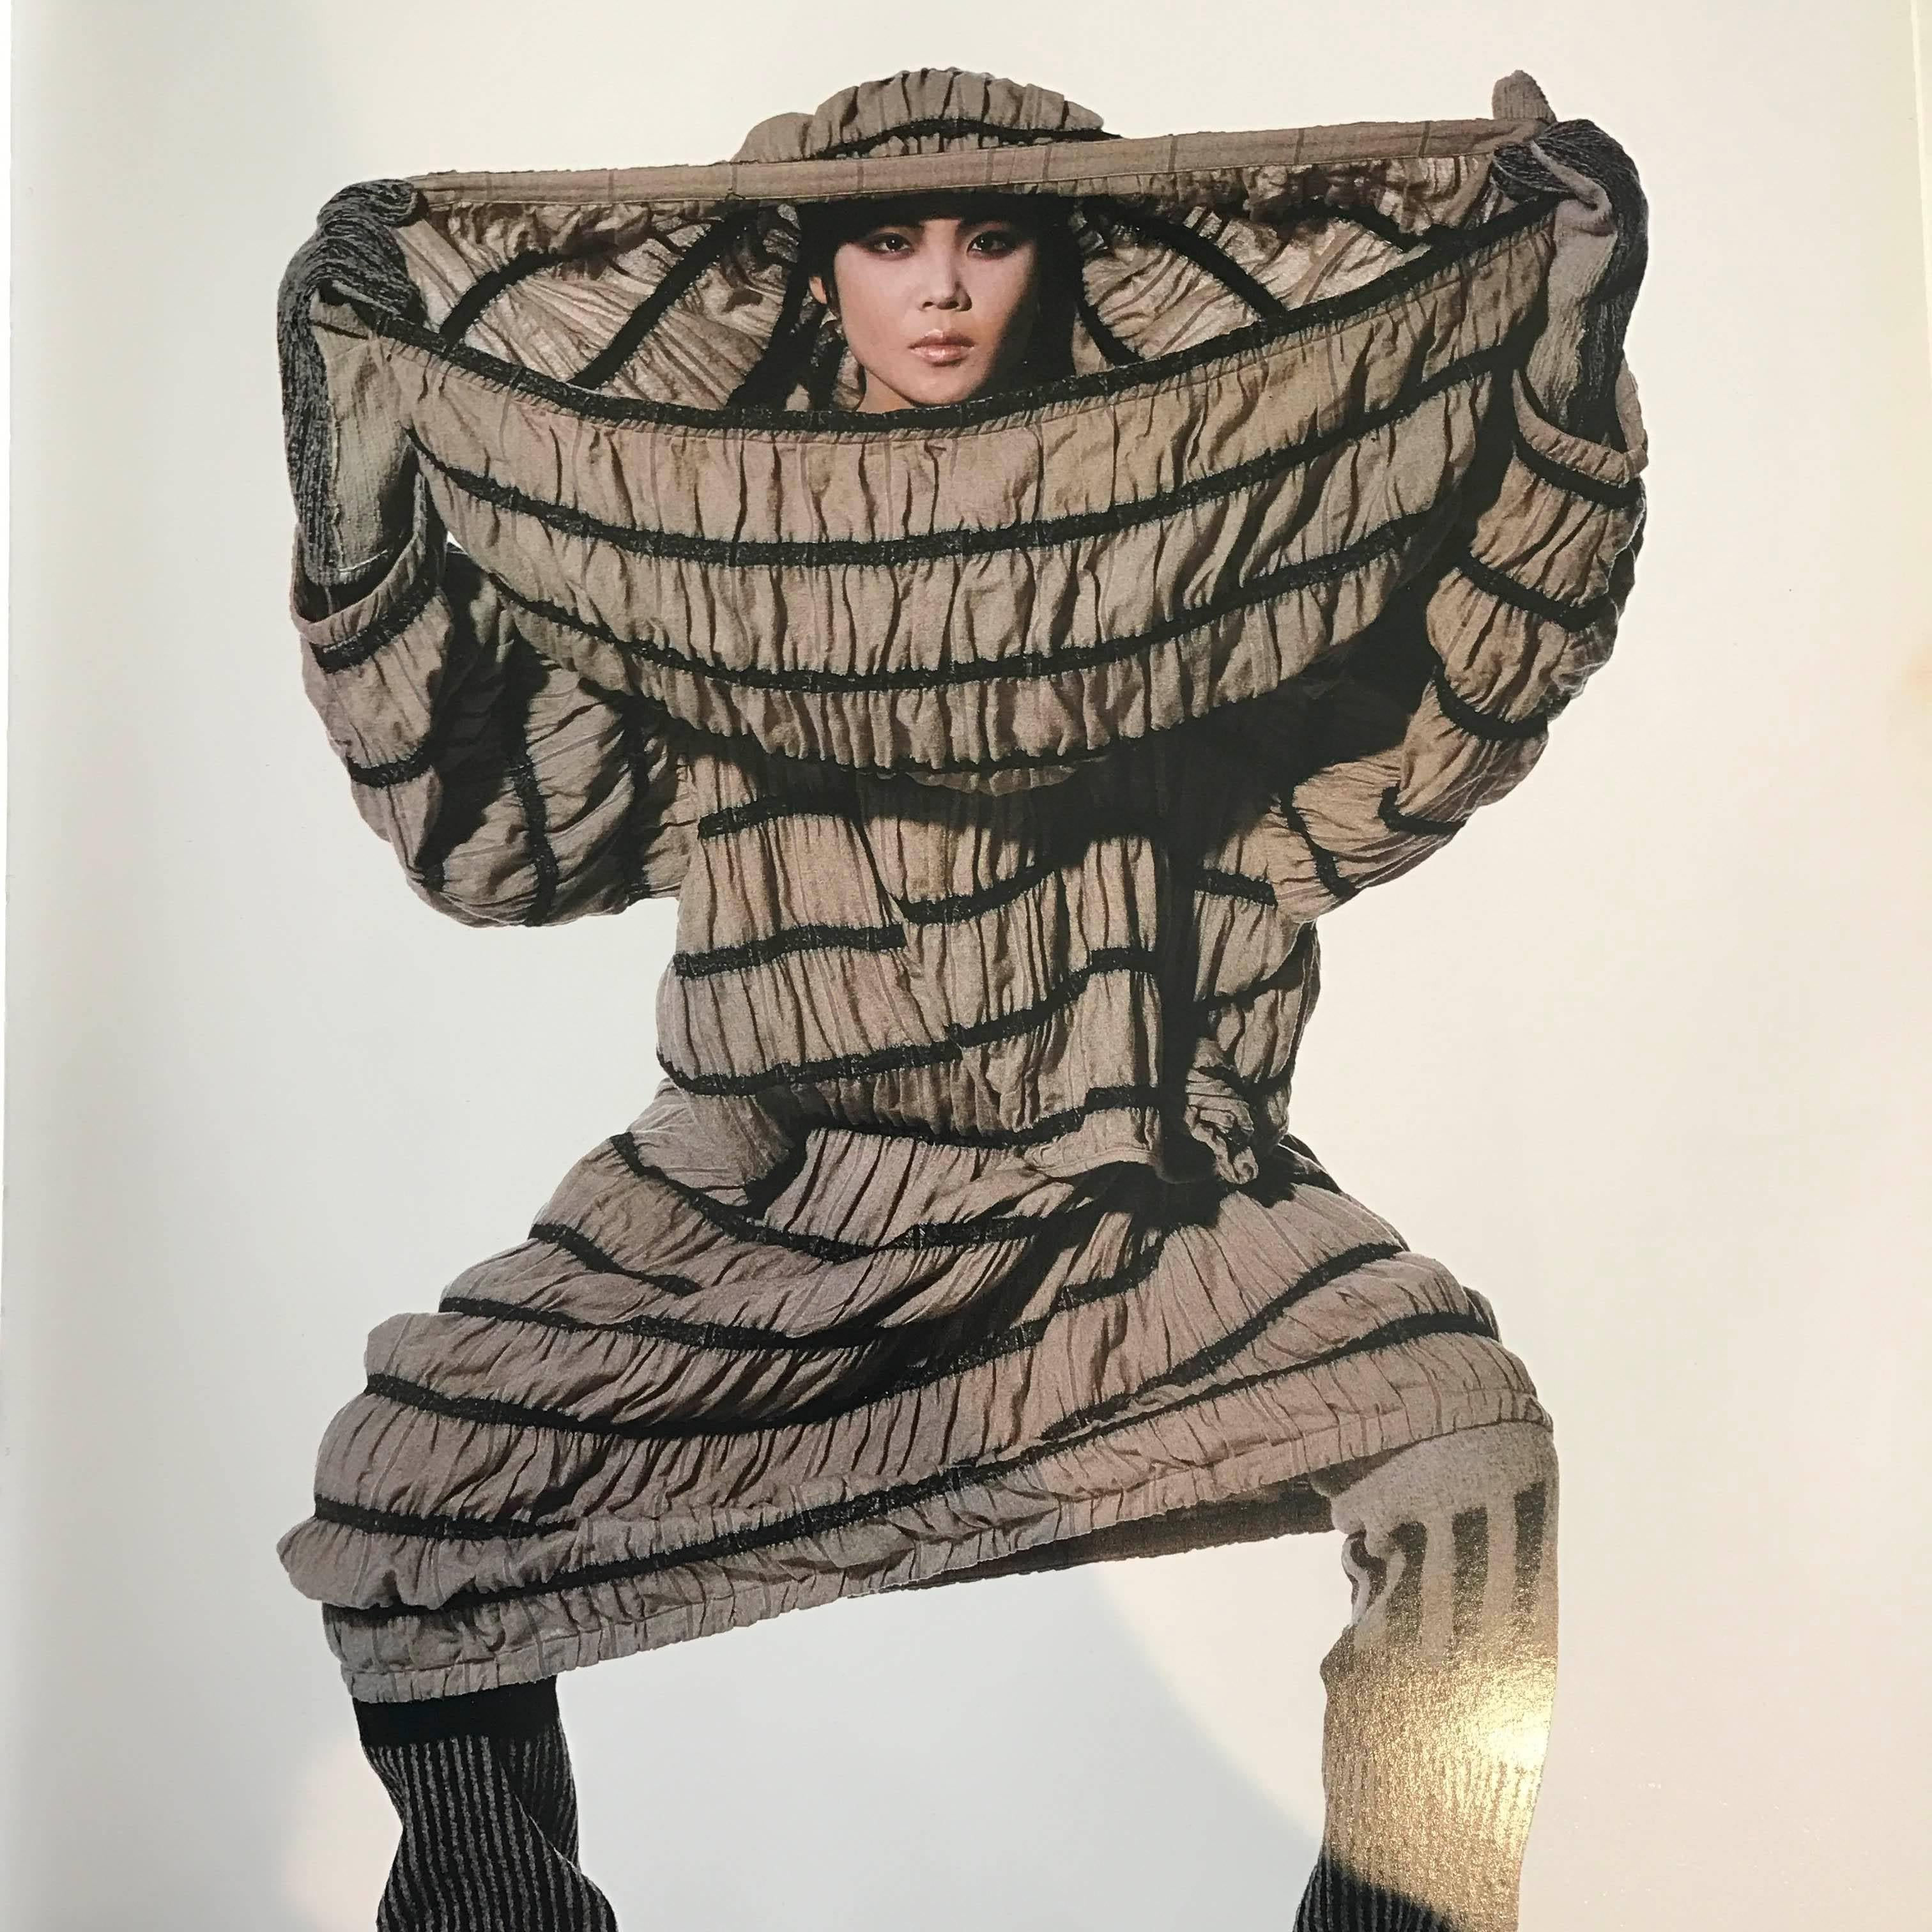 "Did you know there"s a tree in Africa where the bark comes off completely? It's round, just like a tube of jersey. I wanted to make something woven that was warped like African bark." Issey Miyake's own words about his inspiration